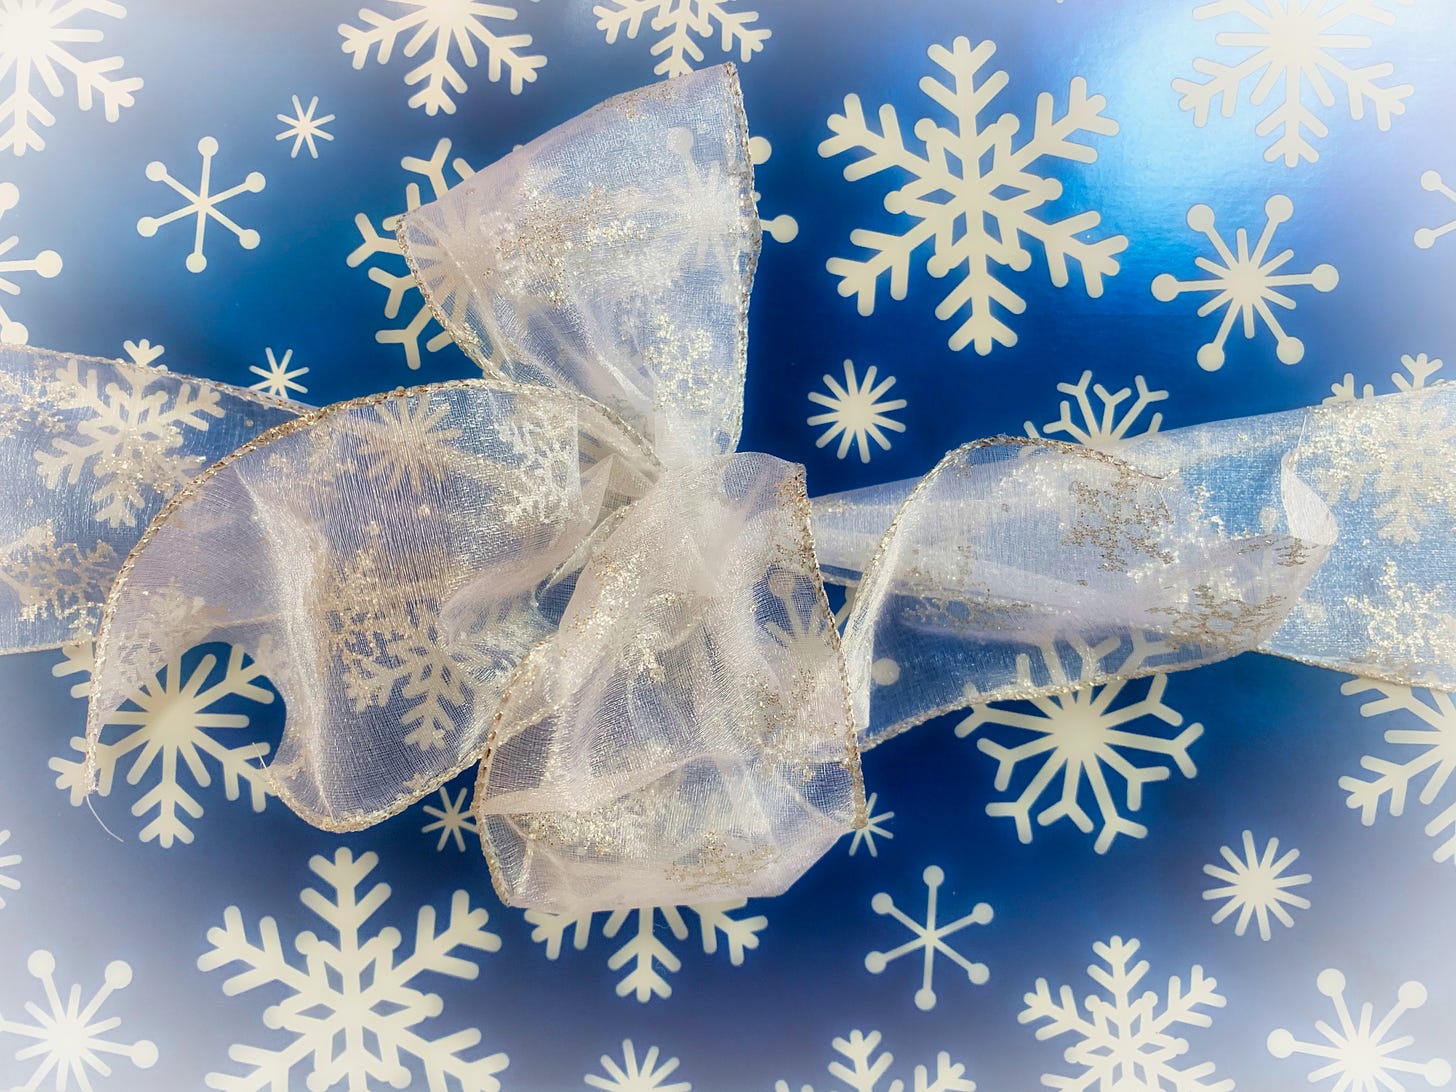 A close-up of a wrapped gift in blue metallic paper ewith snowflakes and a white sparkling ribbon tied into a bow